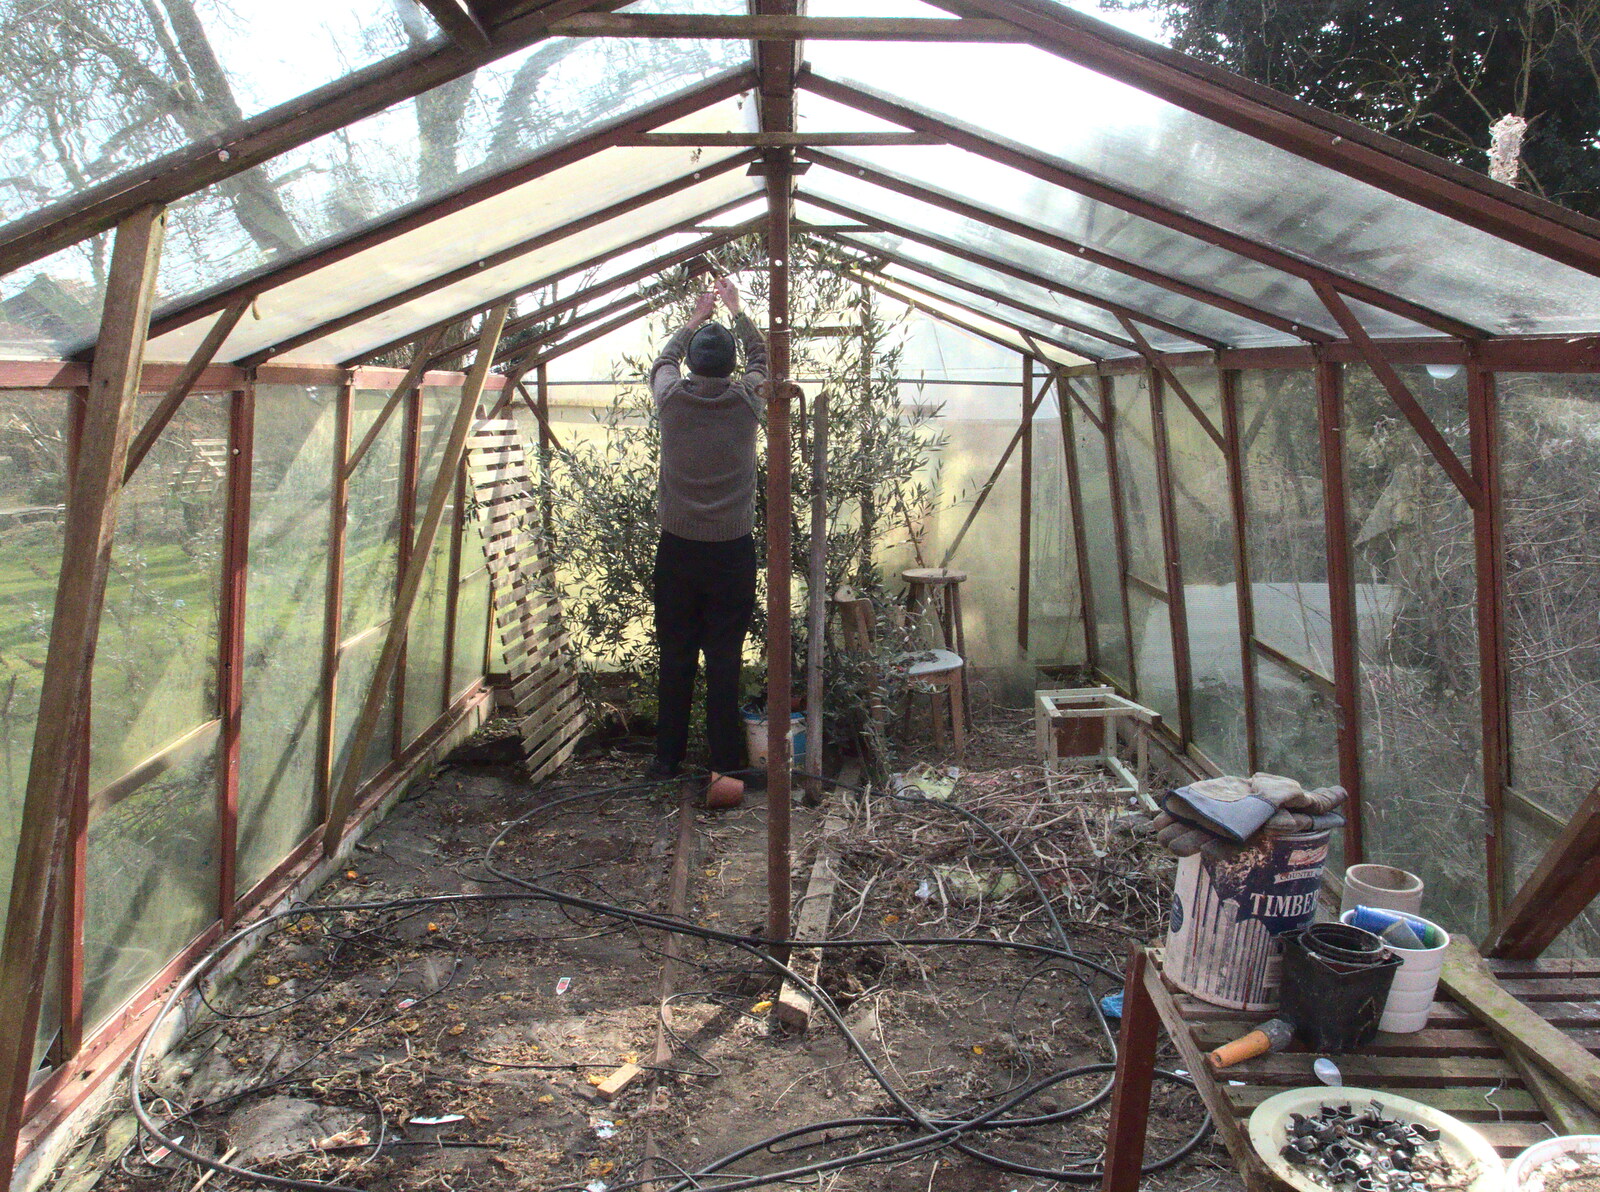 Grandad starts deconstructing the greenhouse from A Crashed Car and Greenhouse Demolition, Brome, Suffolk - 20th March 2015